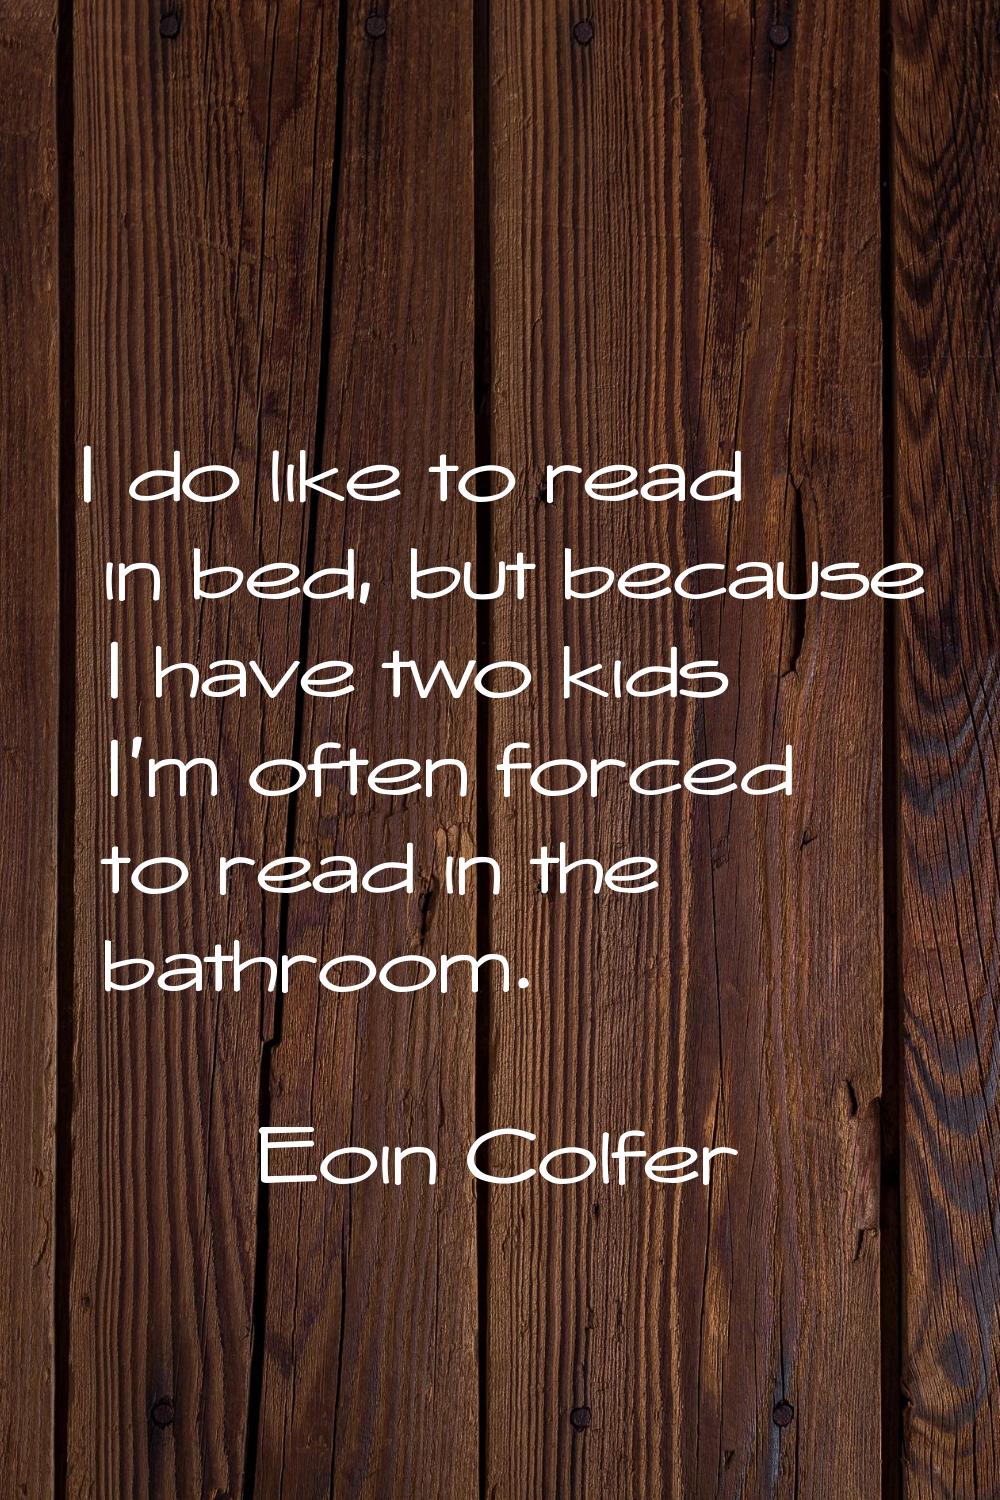 I do like to read in bed, but because I have two kids I'm often forced to read in the bathroom.